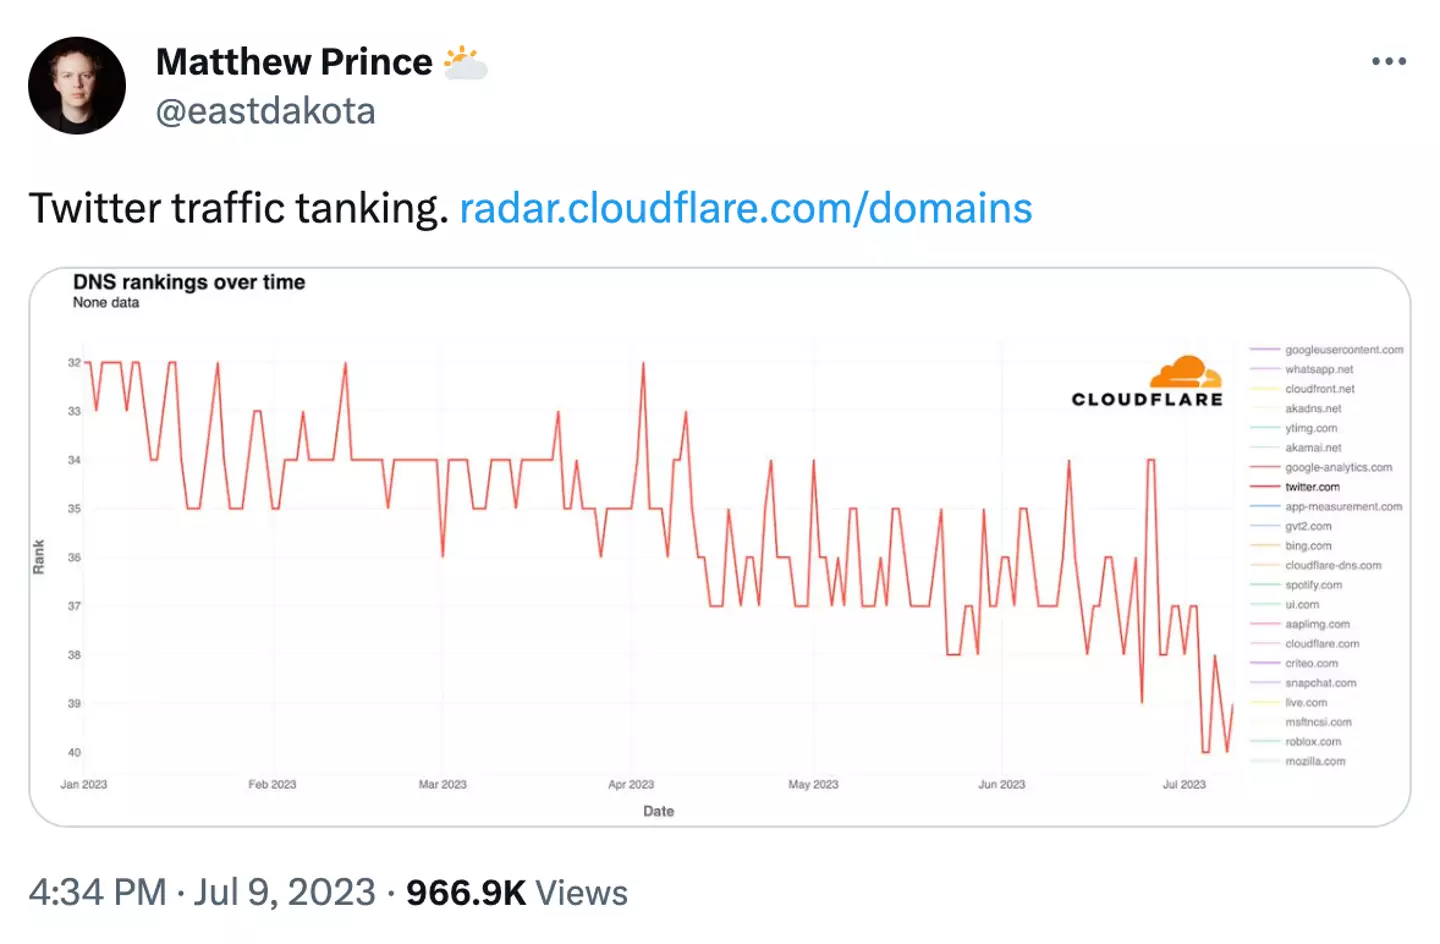 Cloudflare CEO Matthew Prince said Twitter's traffic is 'tanking'.